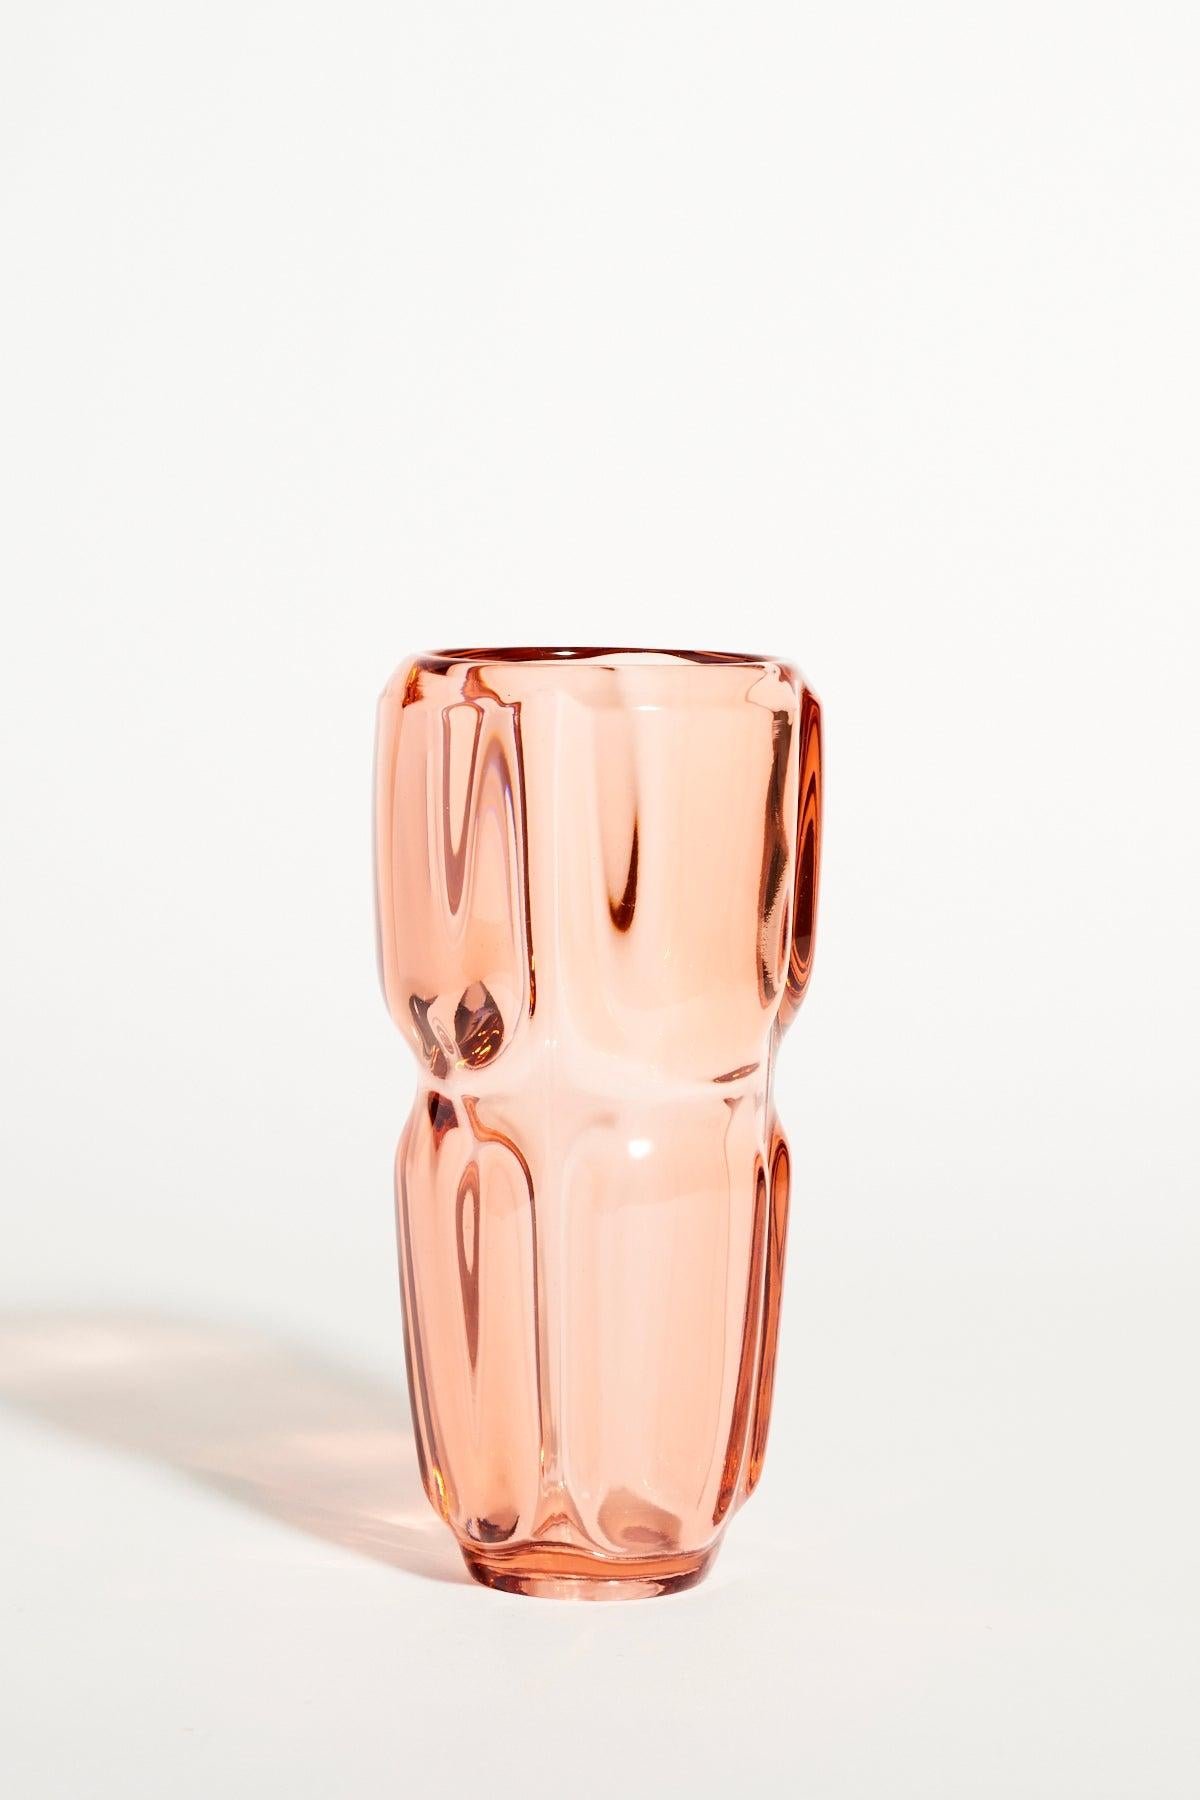 Czech heavy layered glass vase in translucent peach with a rippled watery effect.